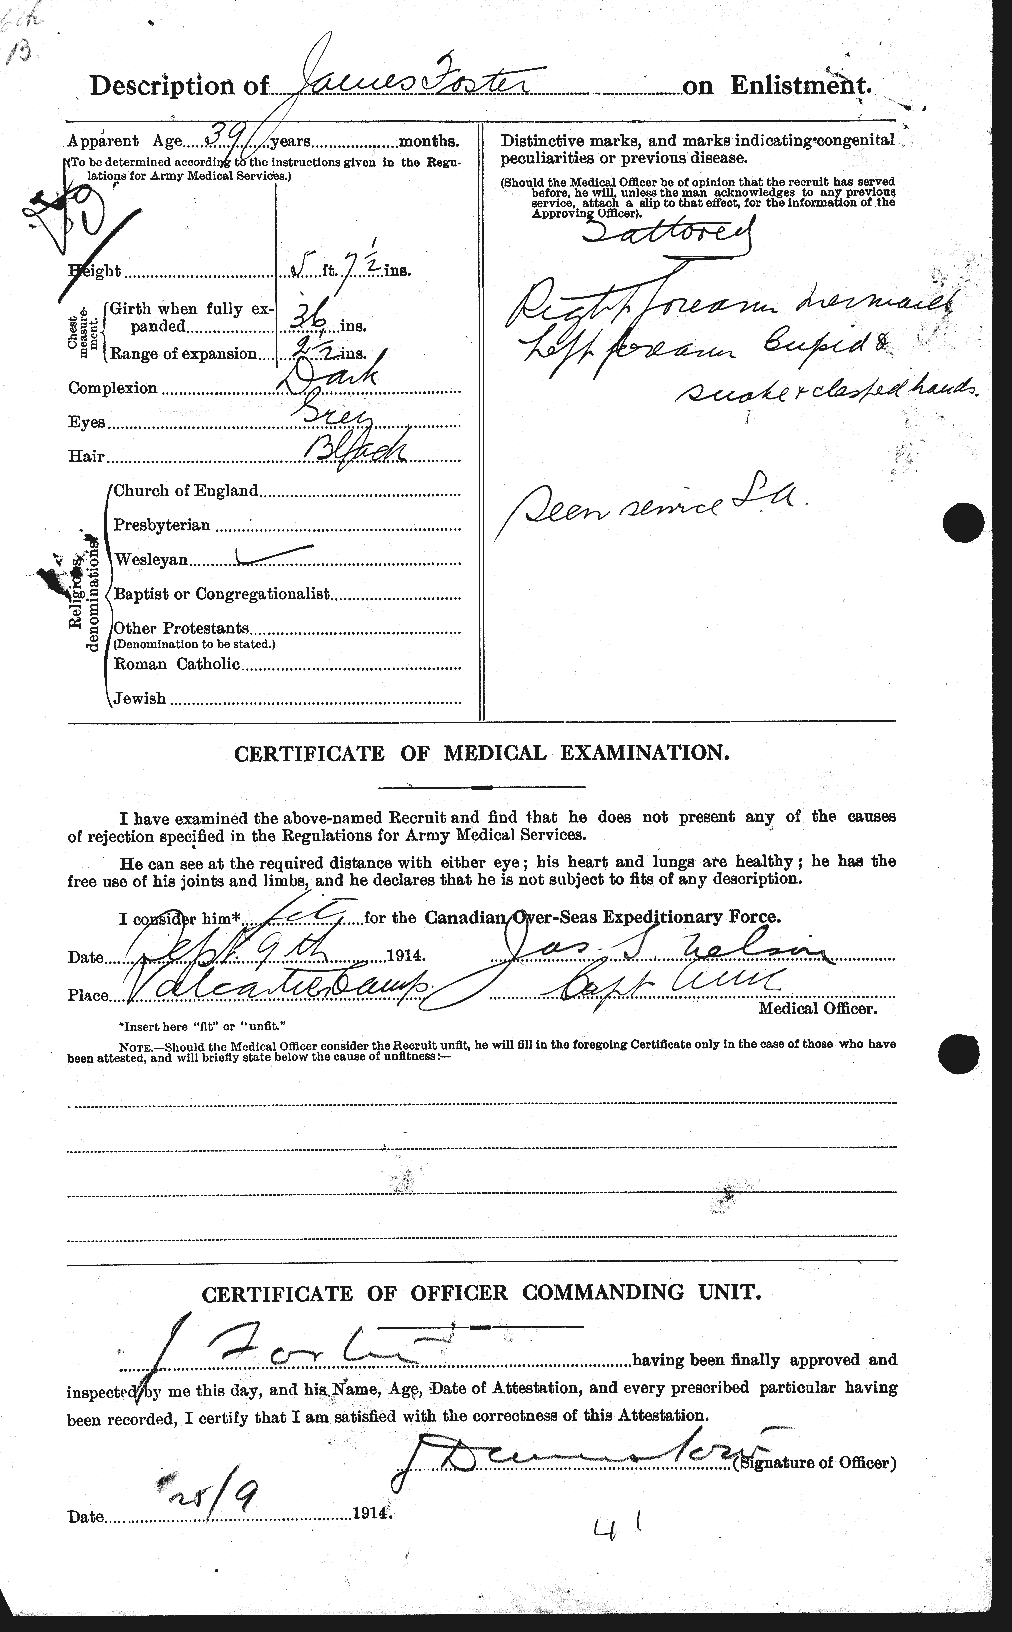 Personnel Records of the First World War - CEF 333282b